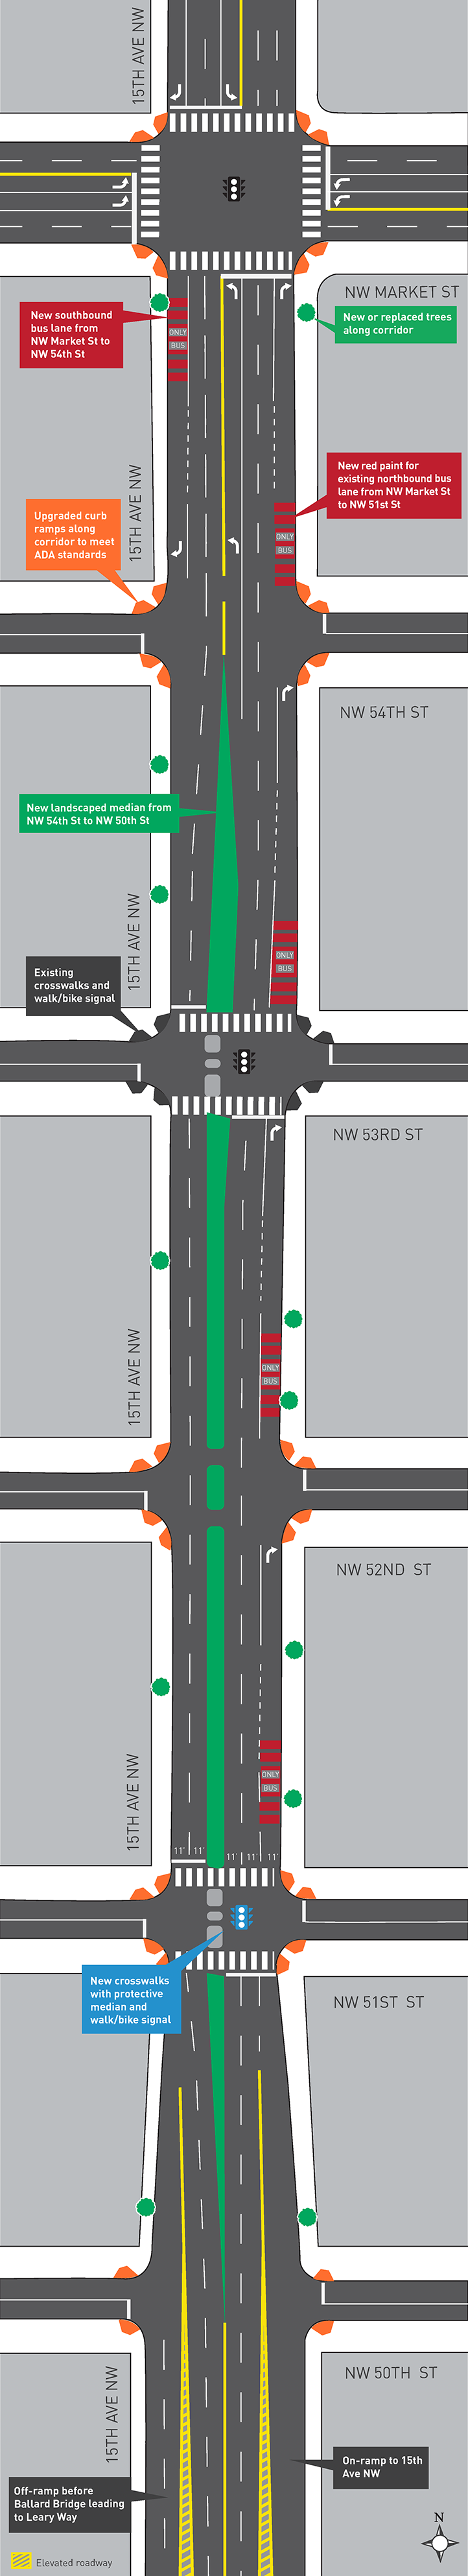 Diagram that illustrates the safety and transit enhancements on 15th Ave NW from NW Market St to NW 50th St. These include new red “bus only” lane markings in the existing northbound bus lane between NW Market St and NW 51st St, a new southbound bus lane between NW Market St and NW 54th St, a new bike and pedestrian signal and crosswalk at NW 51st St, a new landscaped median between NW 54th St and NW 50th St, plus new trees and upgraded curb ramps to meet ADA standards along the project corridor. 